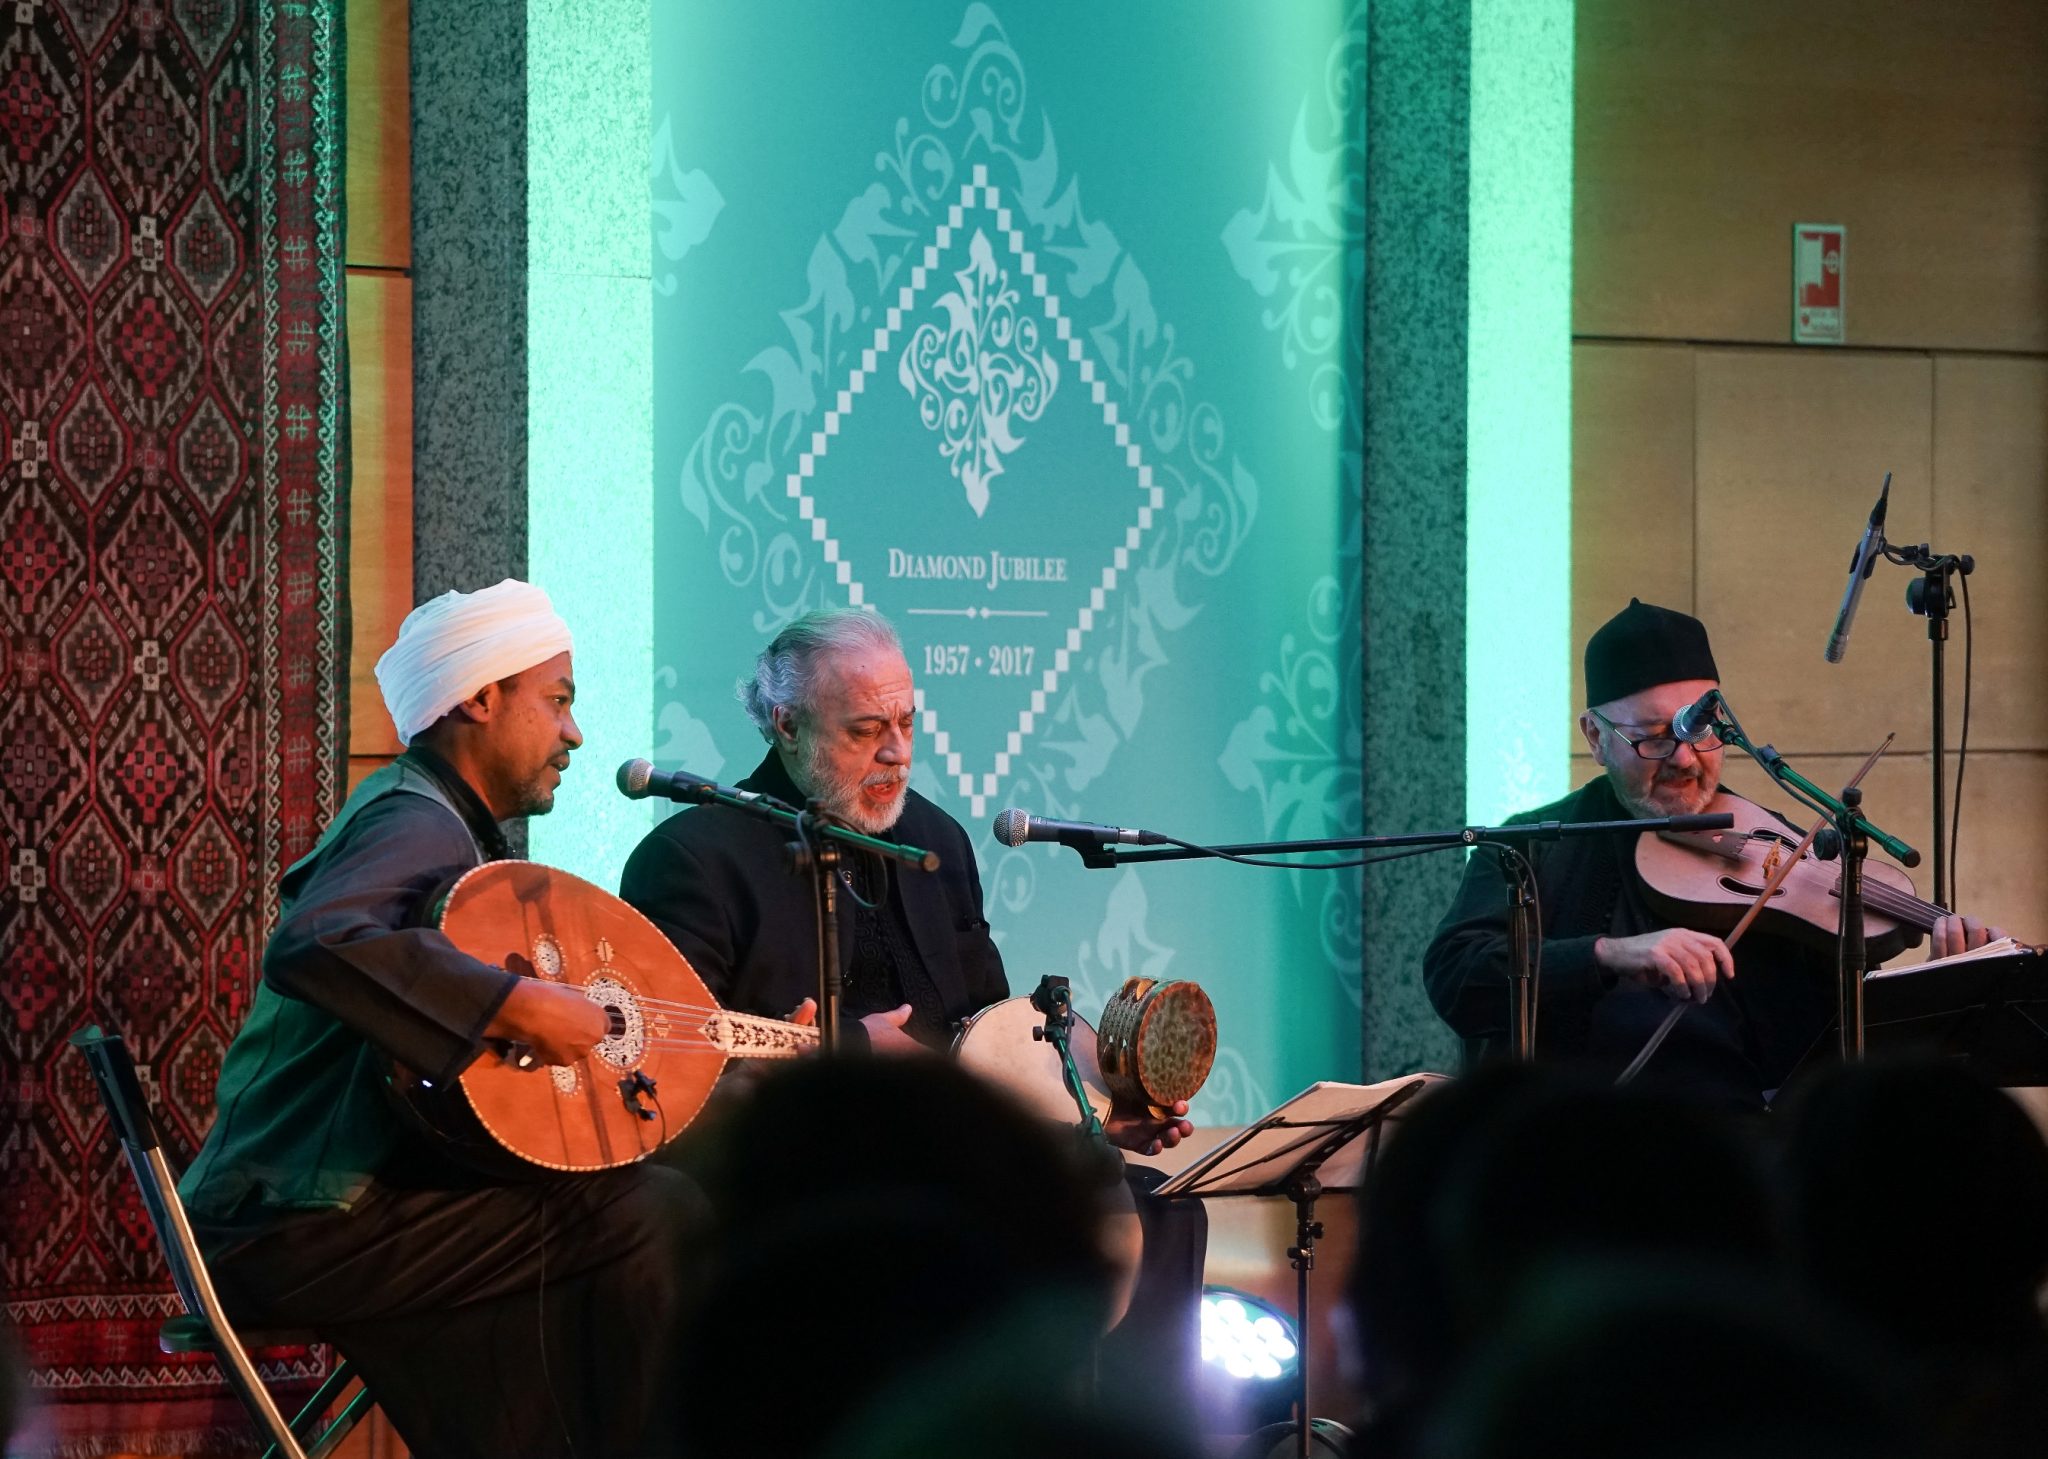 Three men play the lute, darbuka and fidula - respectively from left to right of the observer